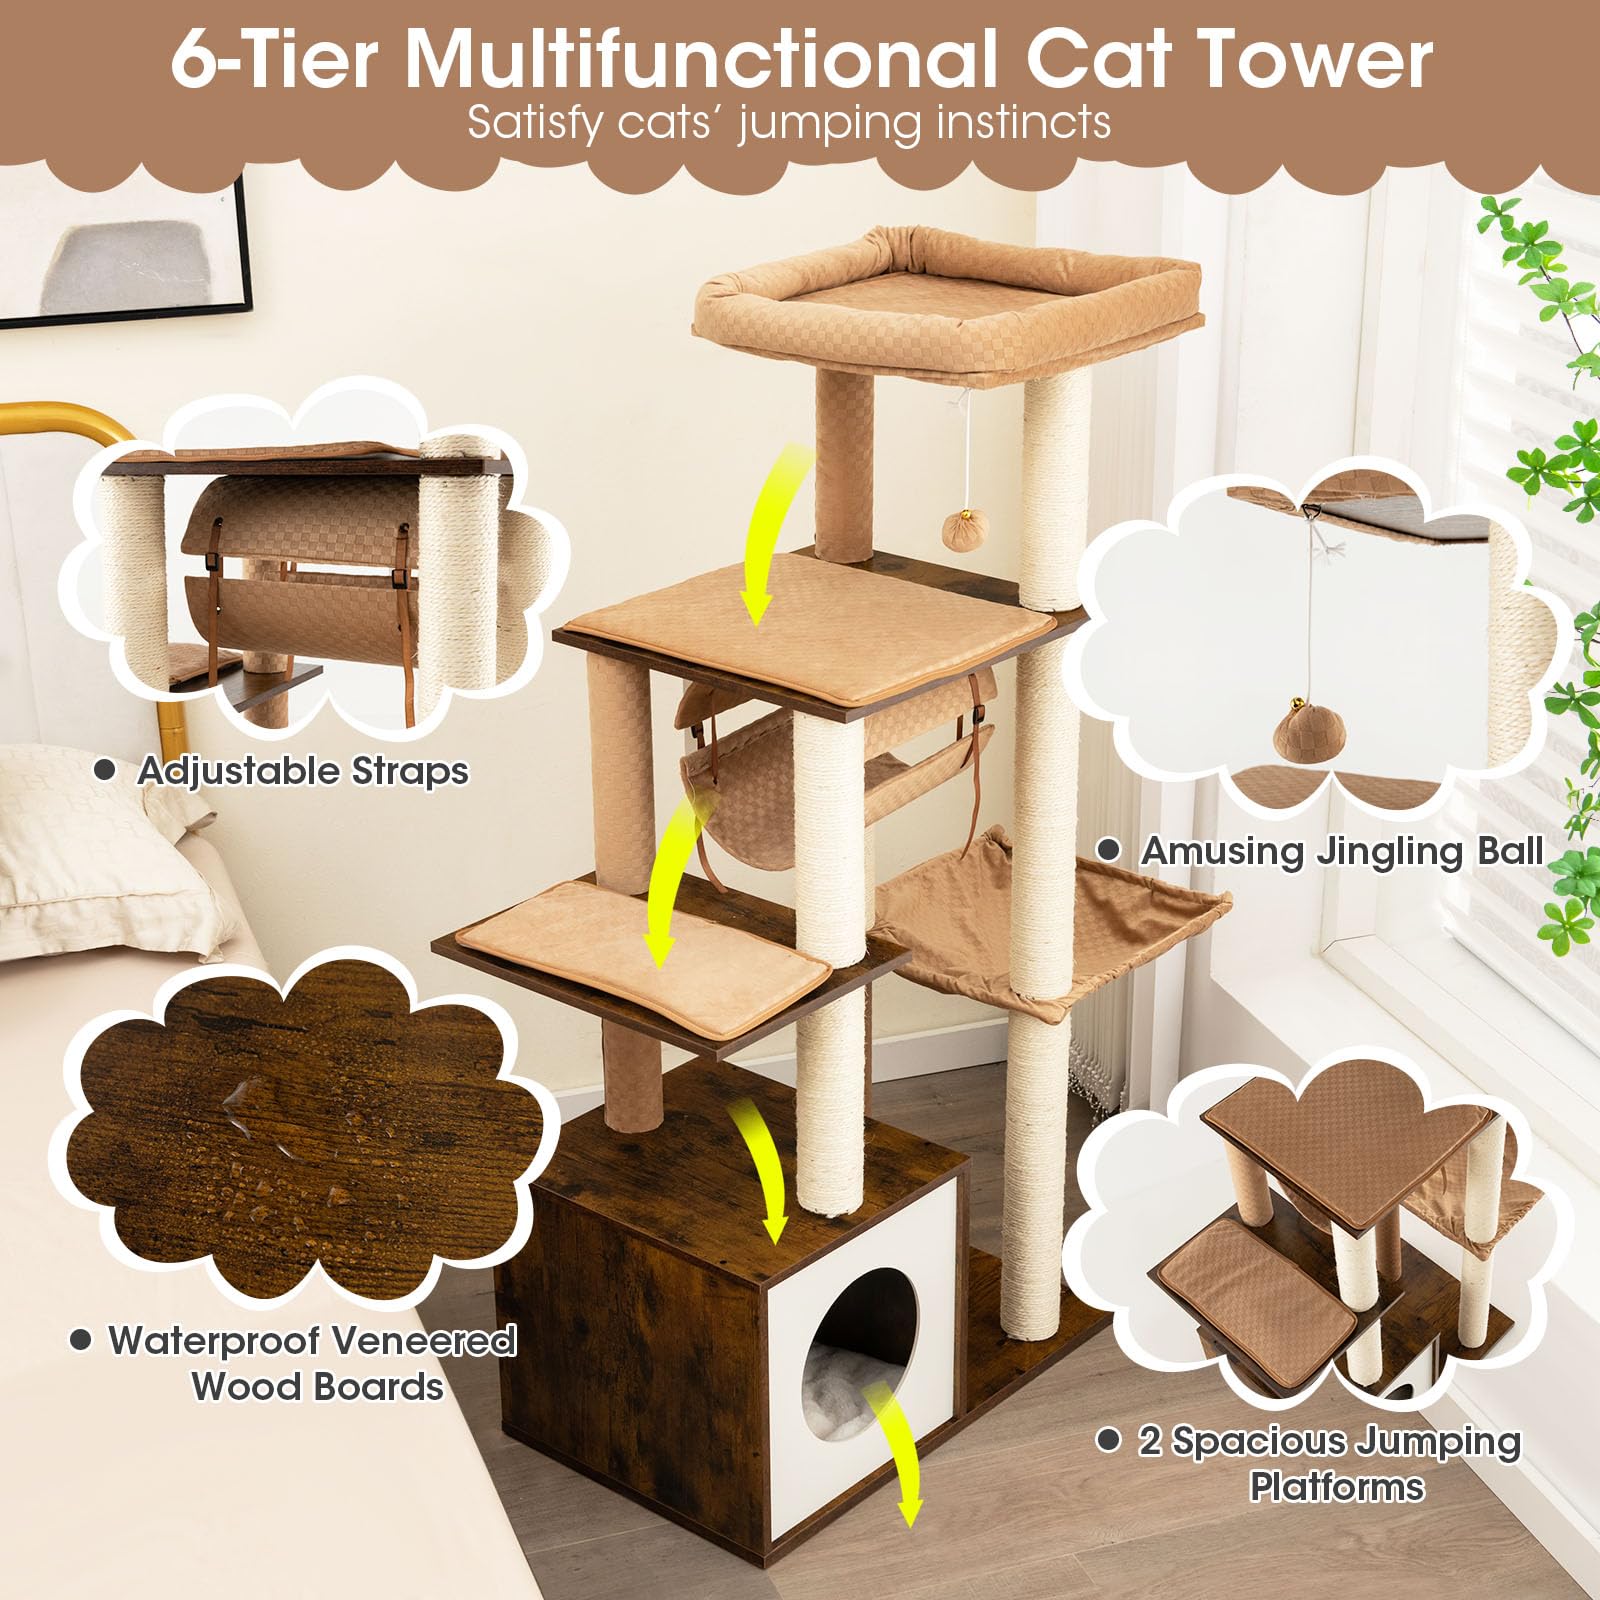 Modern Cat Tree for Indoor Cats - Tangkula